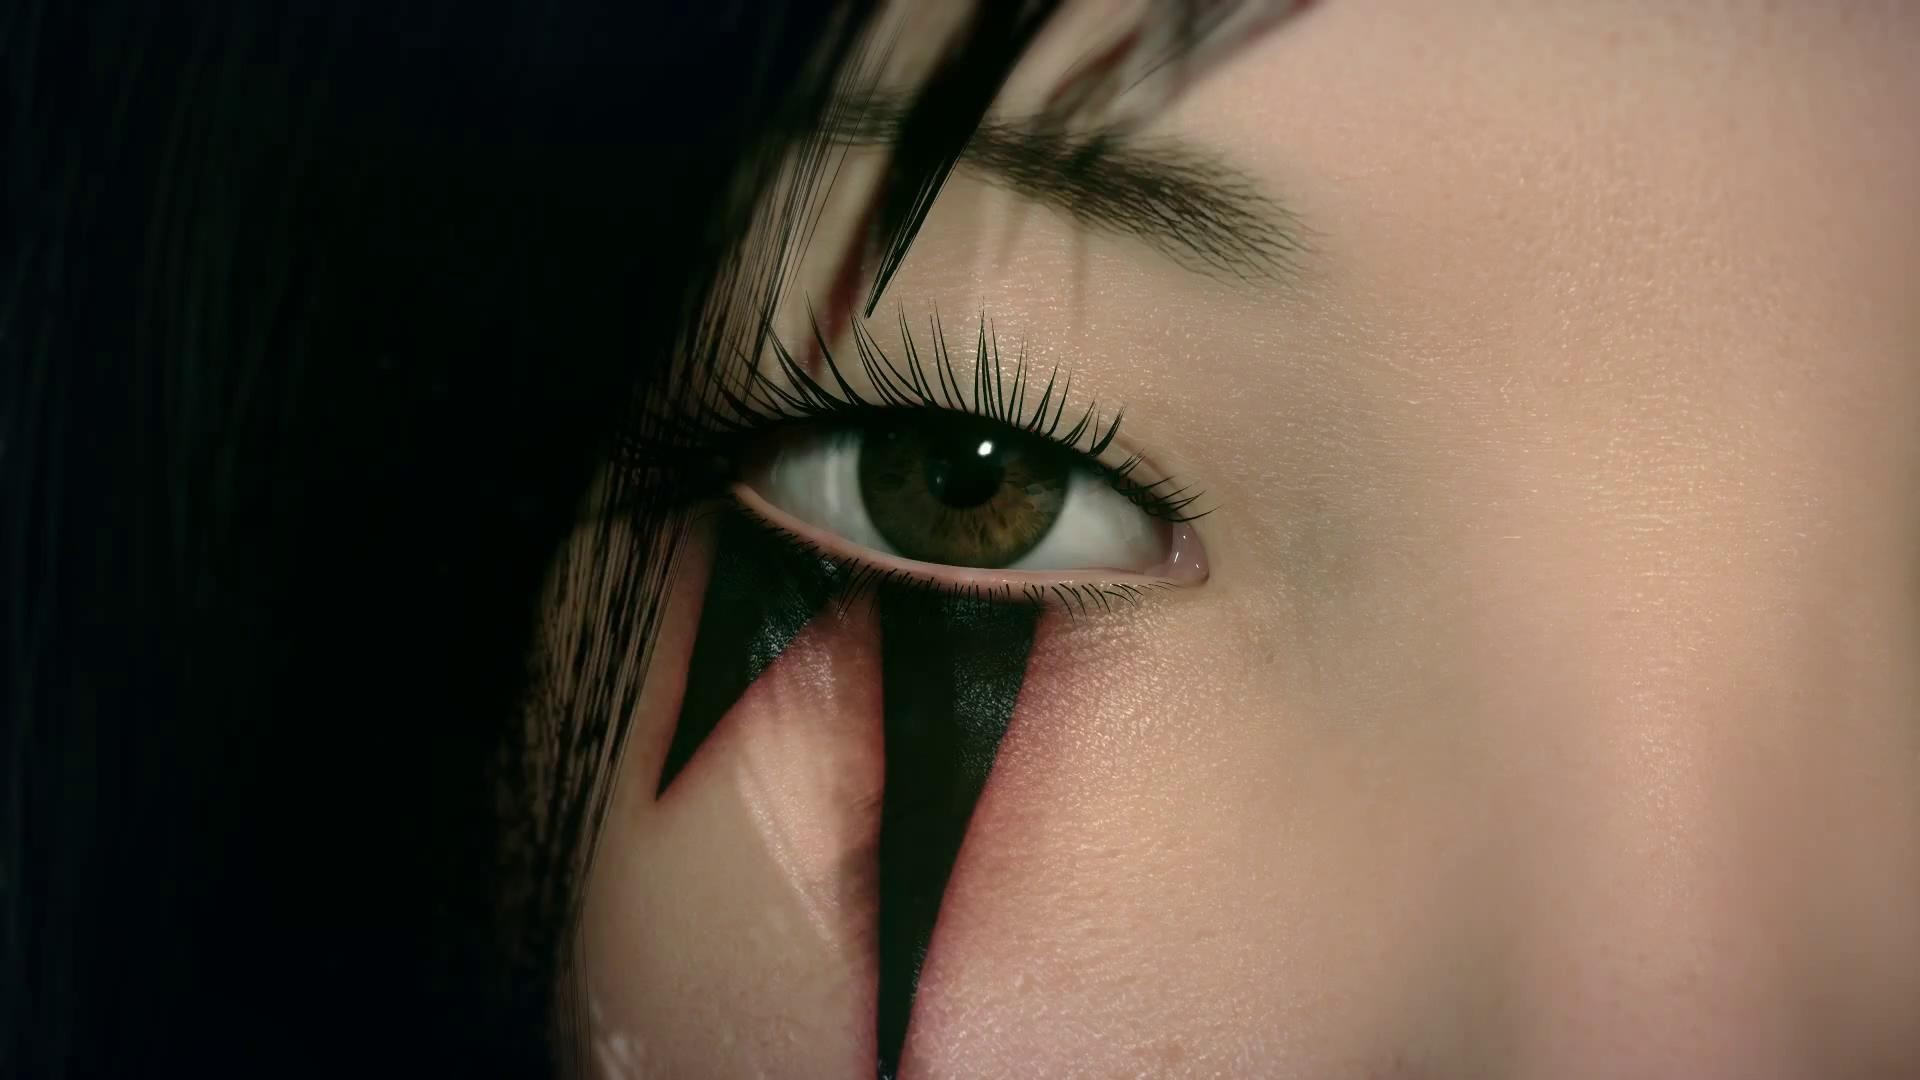 Mirror's Edge 2 Gets Re-titled, Definitely Isn't A Sequel